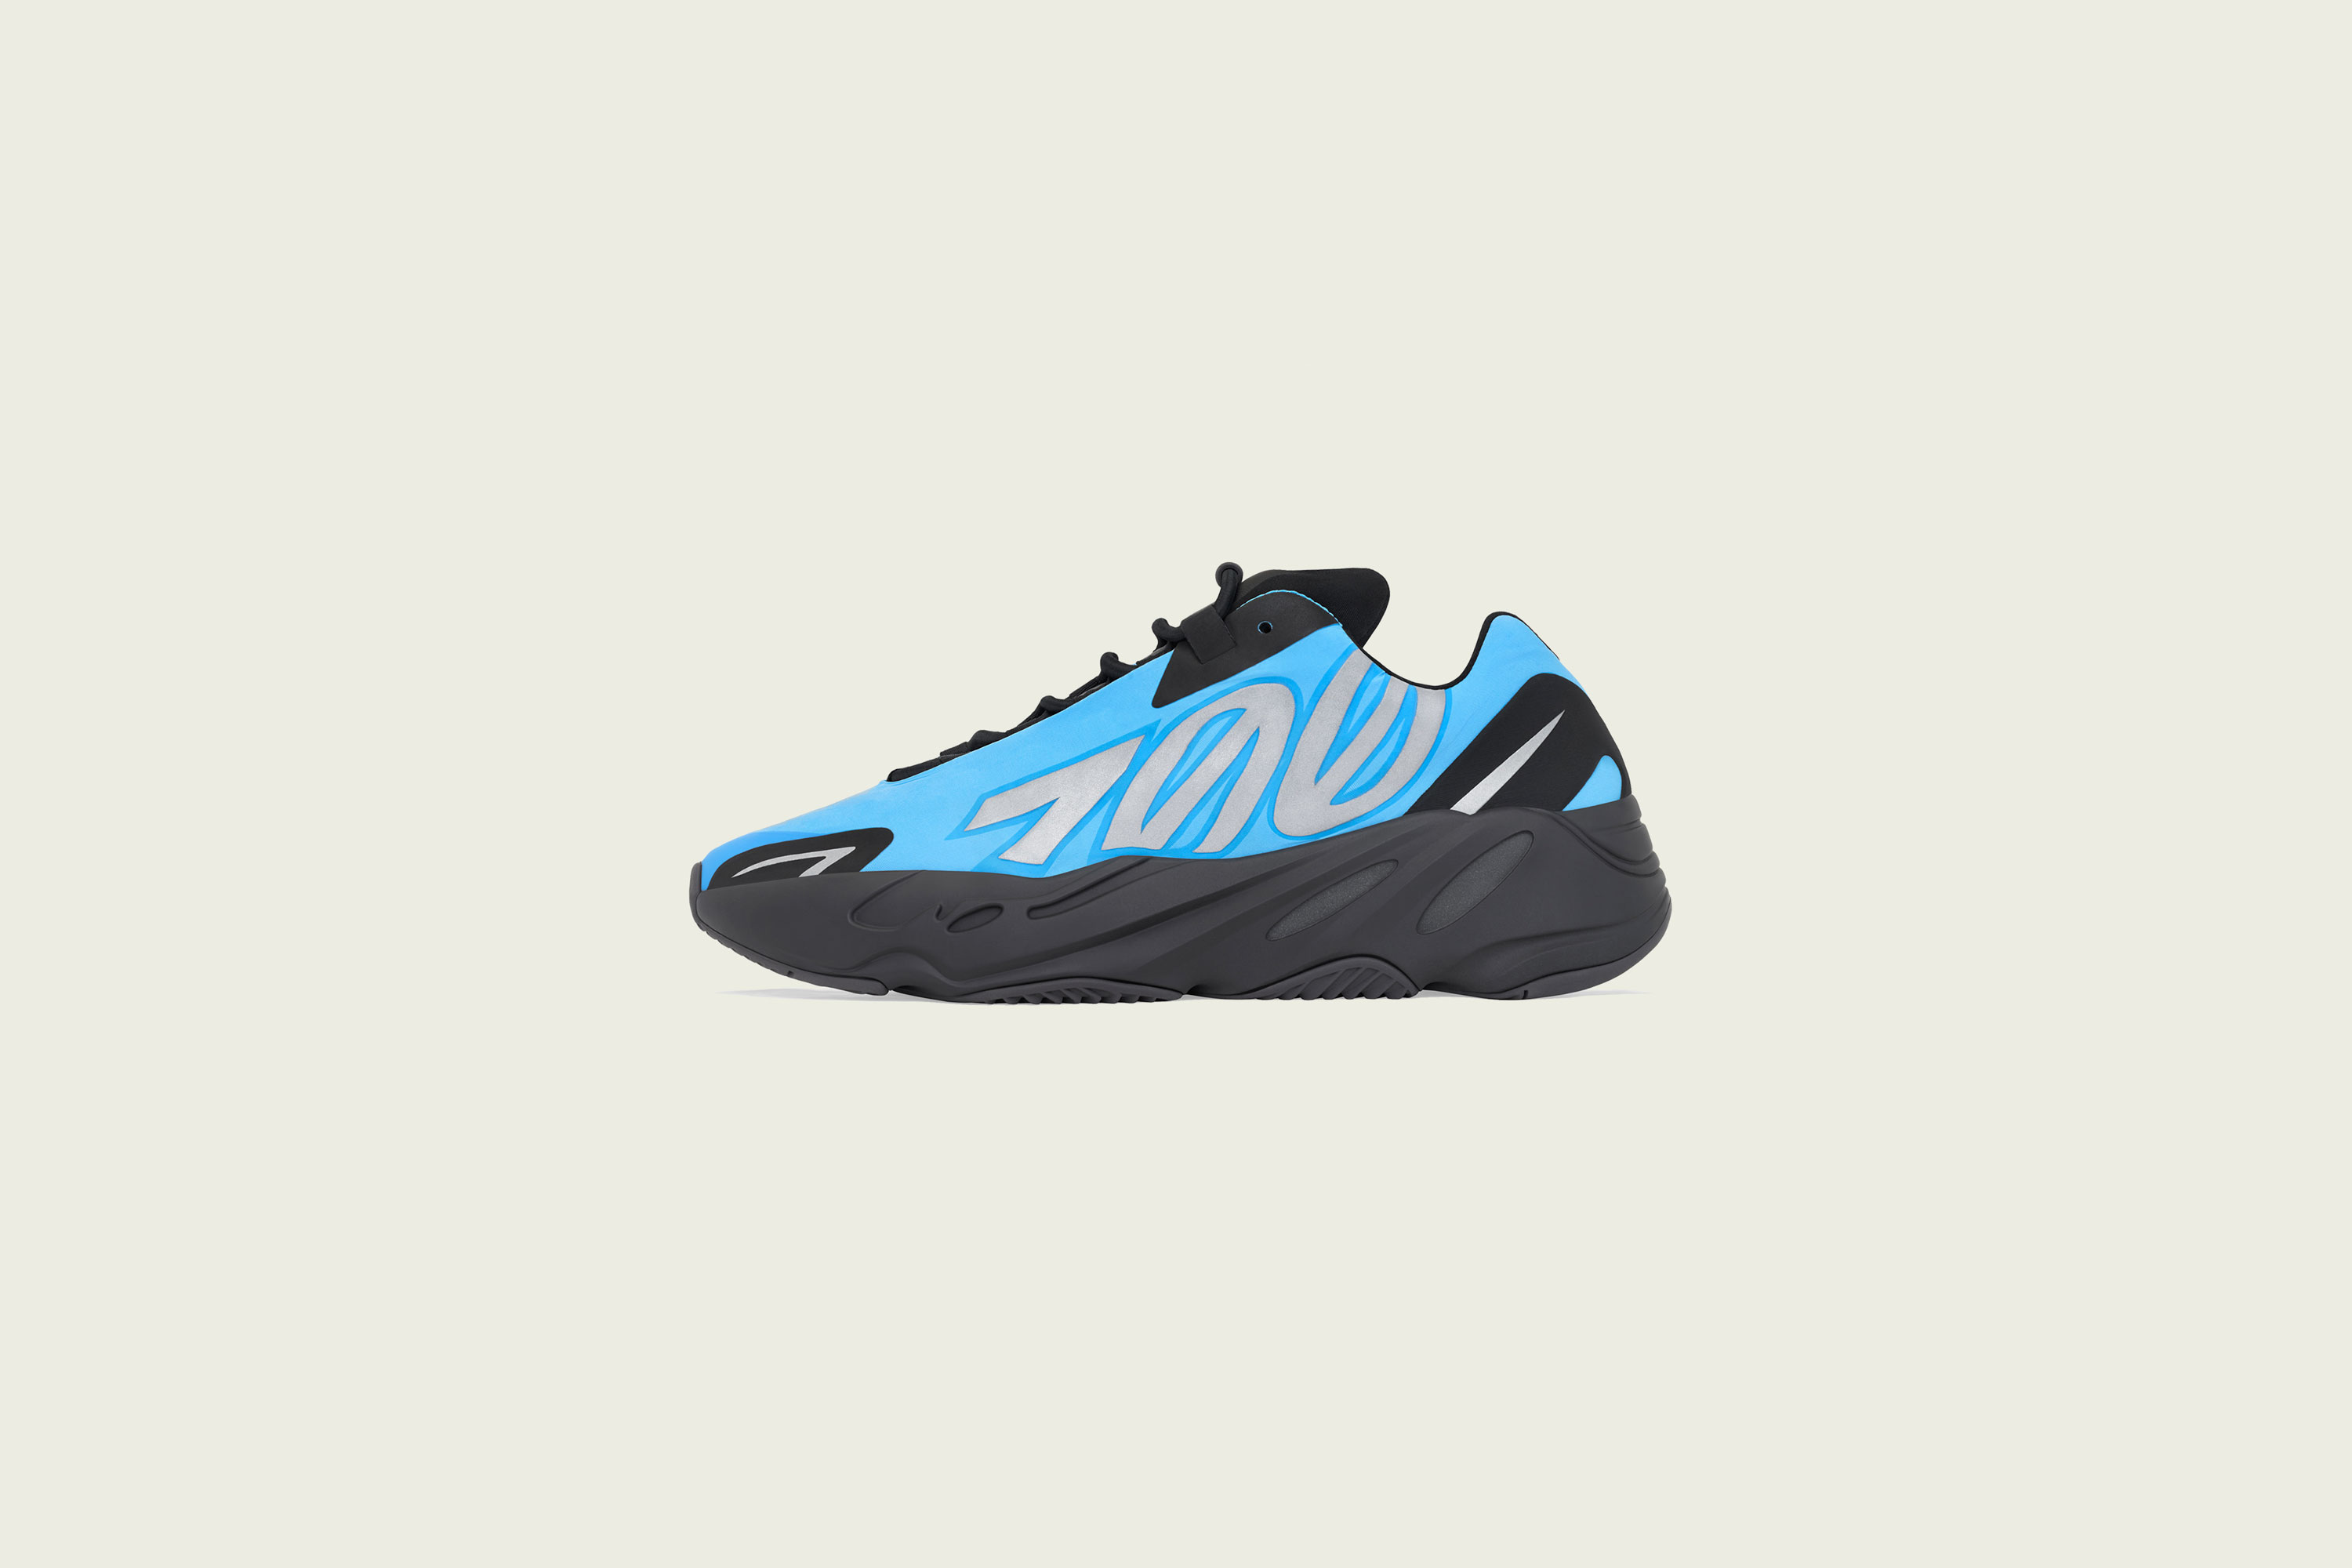 adidas - Yeezy Boost 700 MNVN - Bright Cyan - Up There